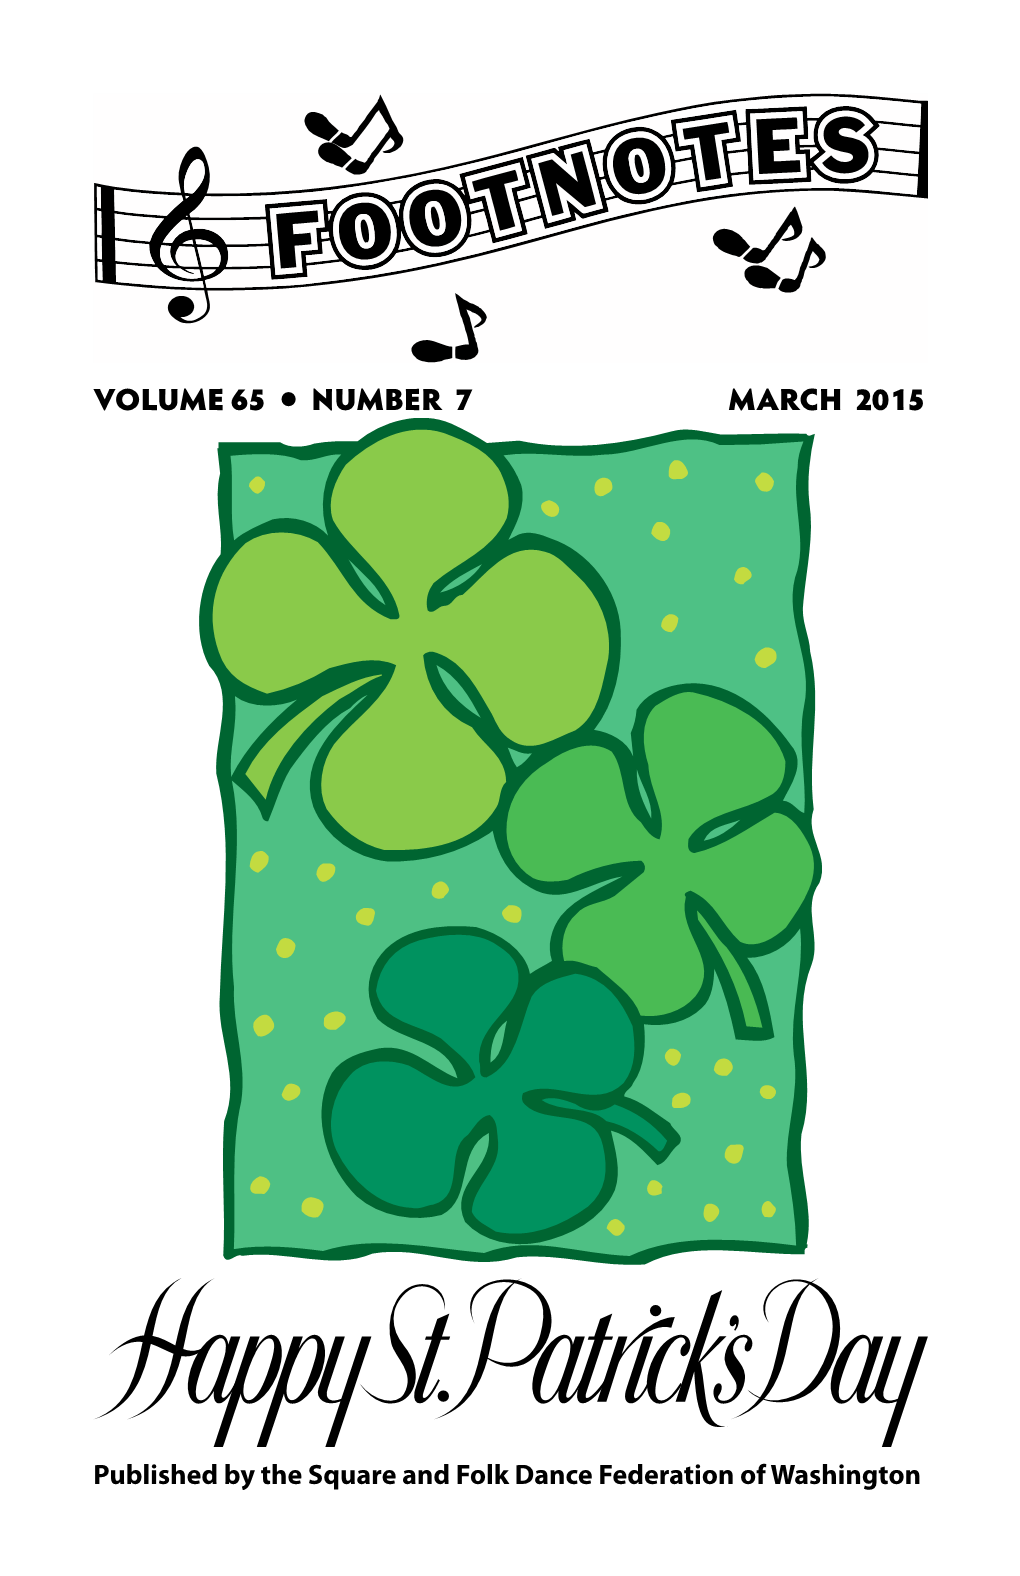 Volume 65 • Number 7 March 2015